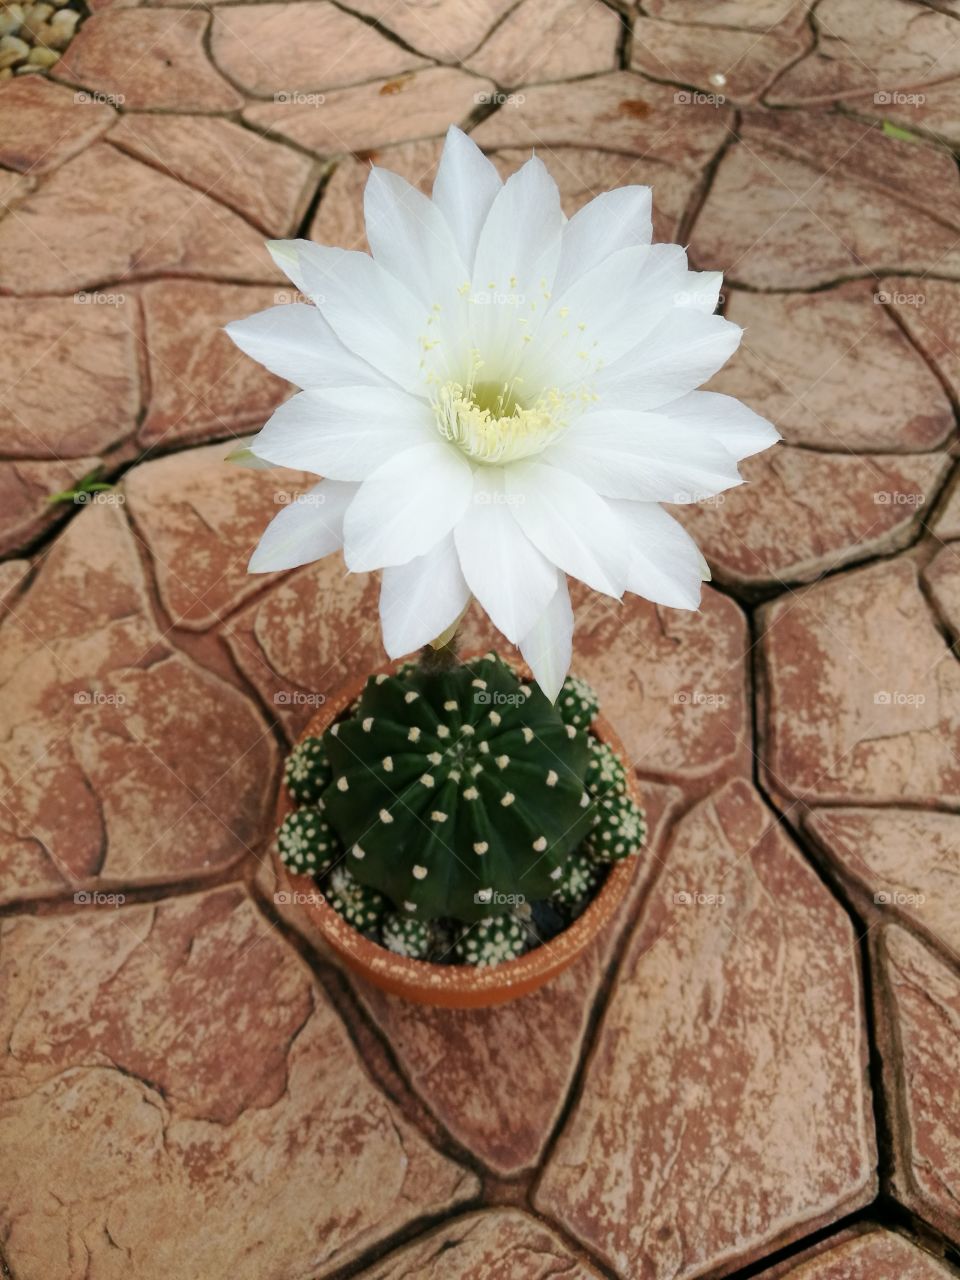 Cactus plant with beautiful white flower on brown flagstone background.